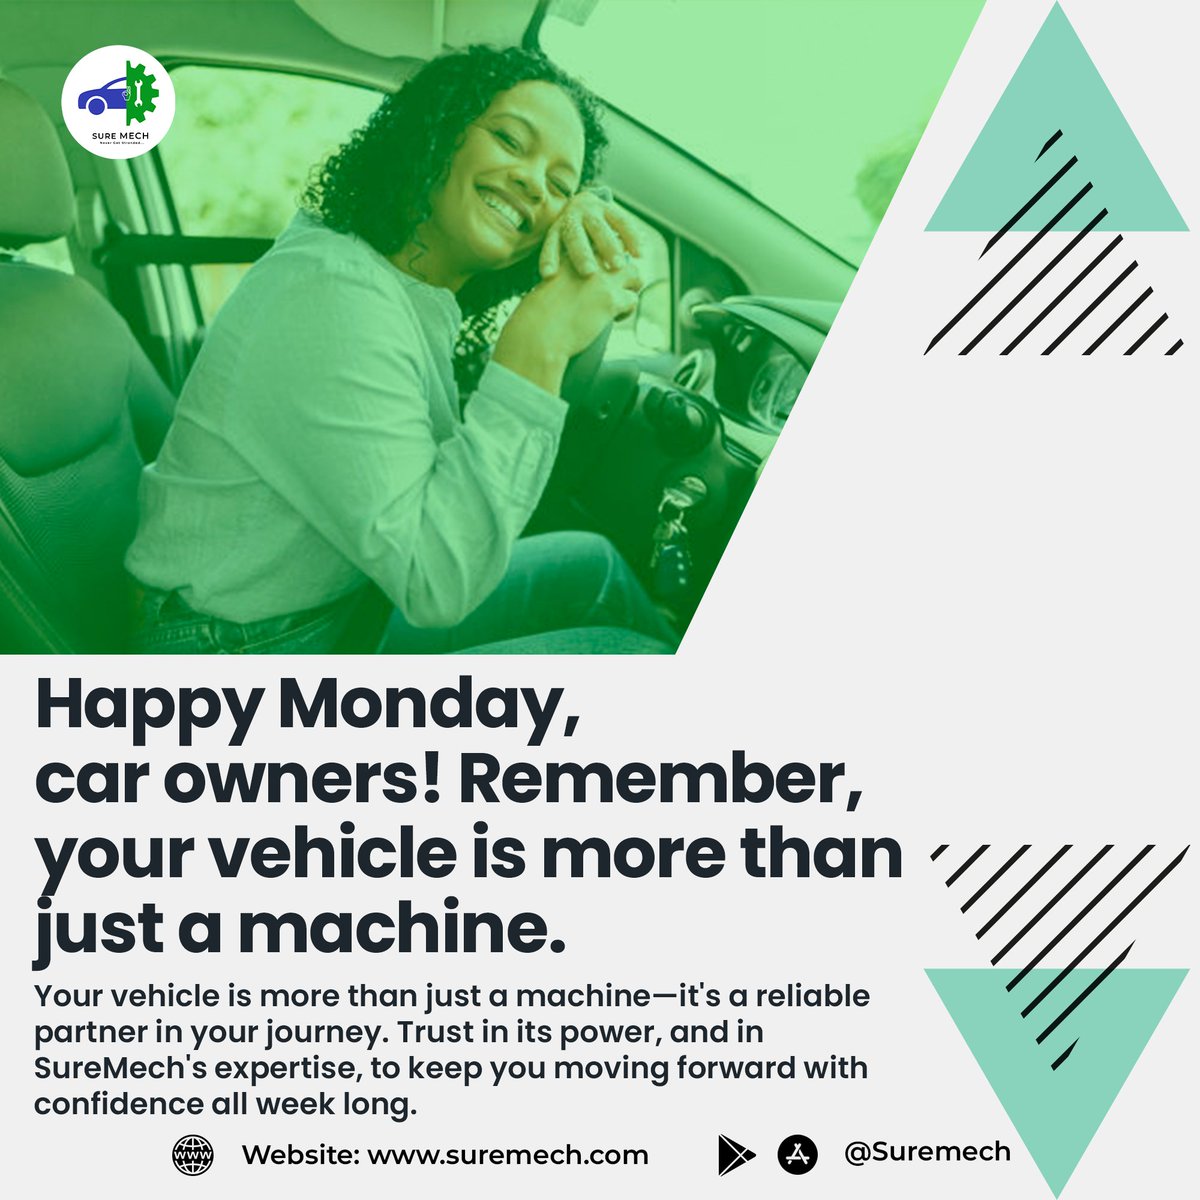 Happy Monday, car owners! Your vehicle is your trusted partner on life's journey. Trust in SureMech to keep you moving forward confidently. Here's to a week of smooth rides and worry-free travels! #SureMech #MondayMotivation #CarCare 🚗✨